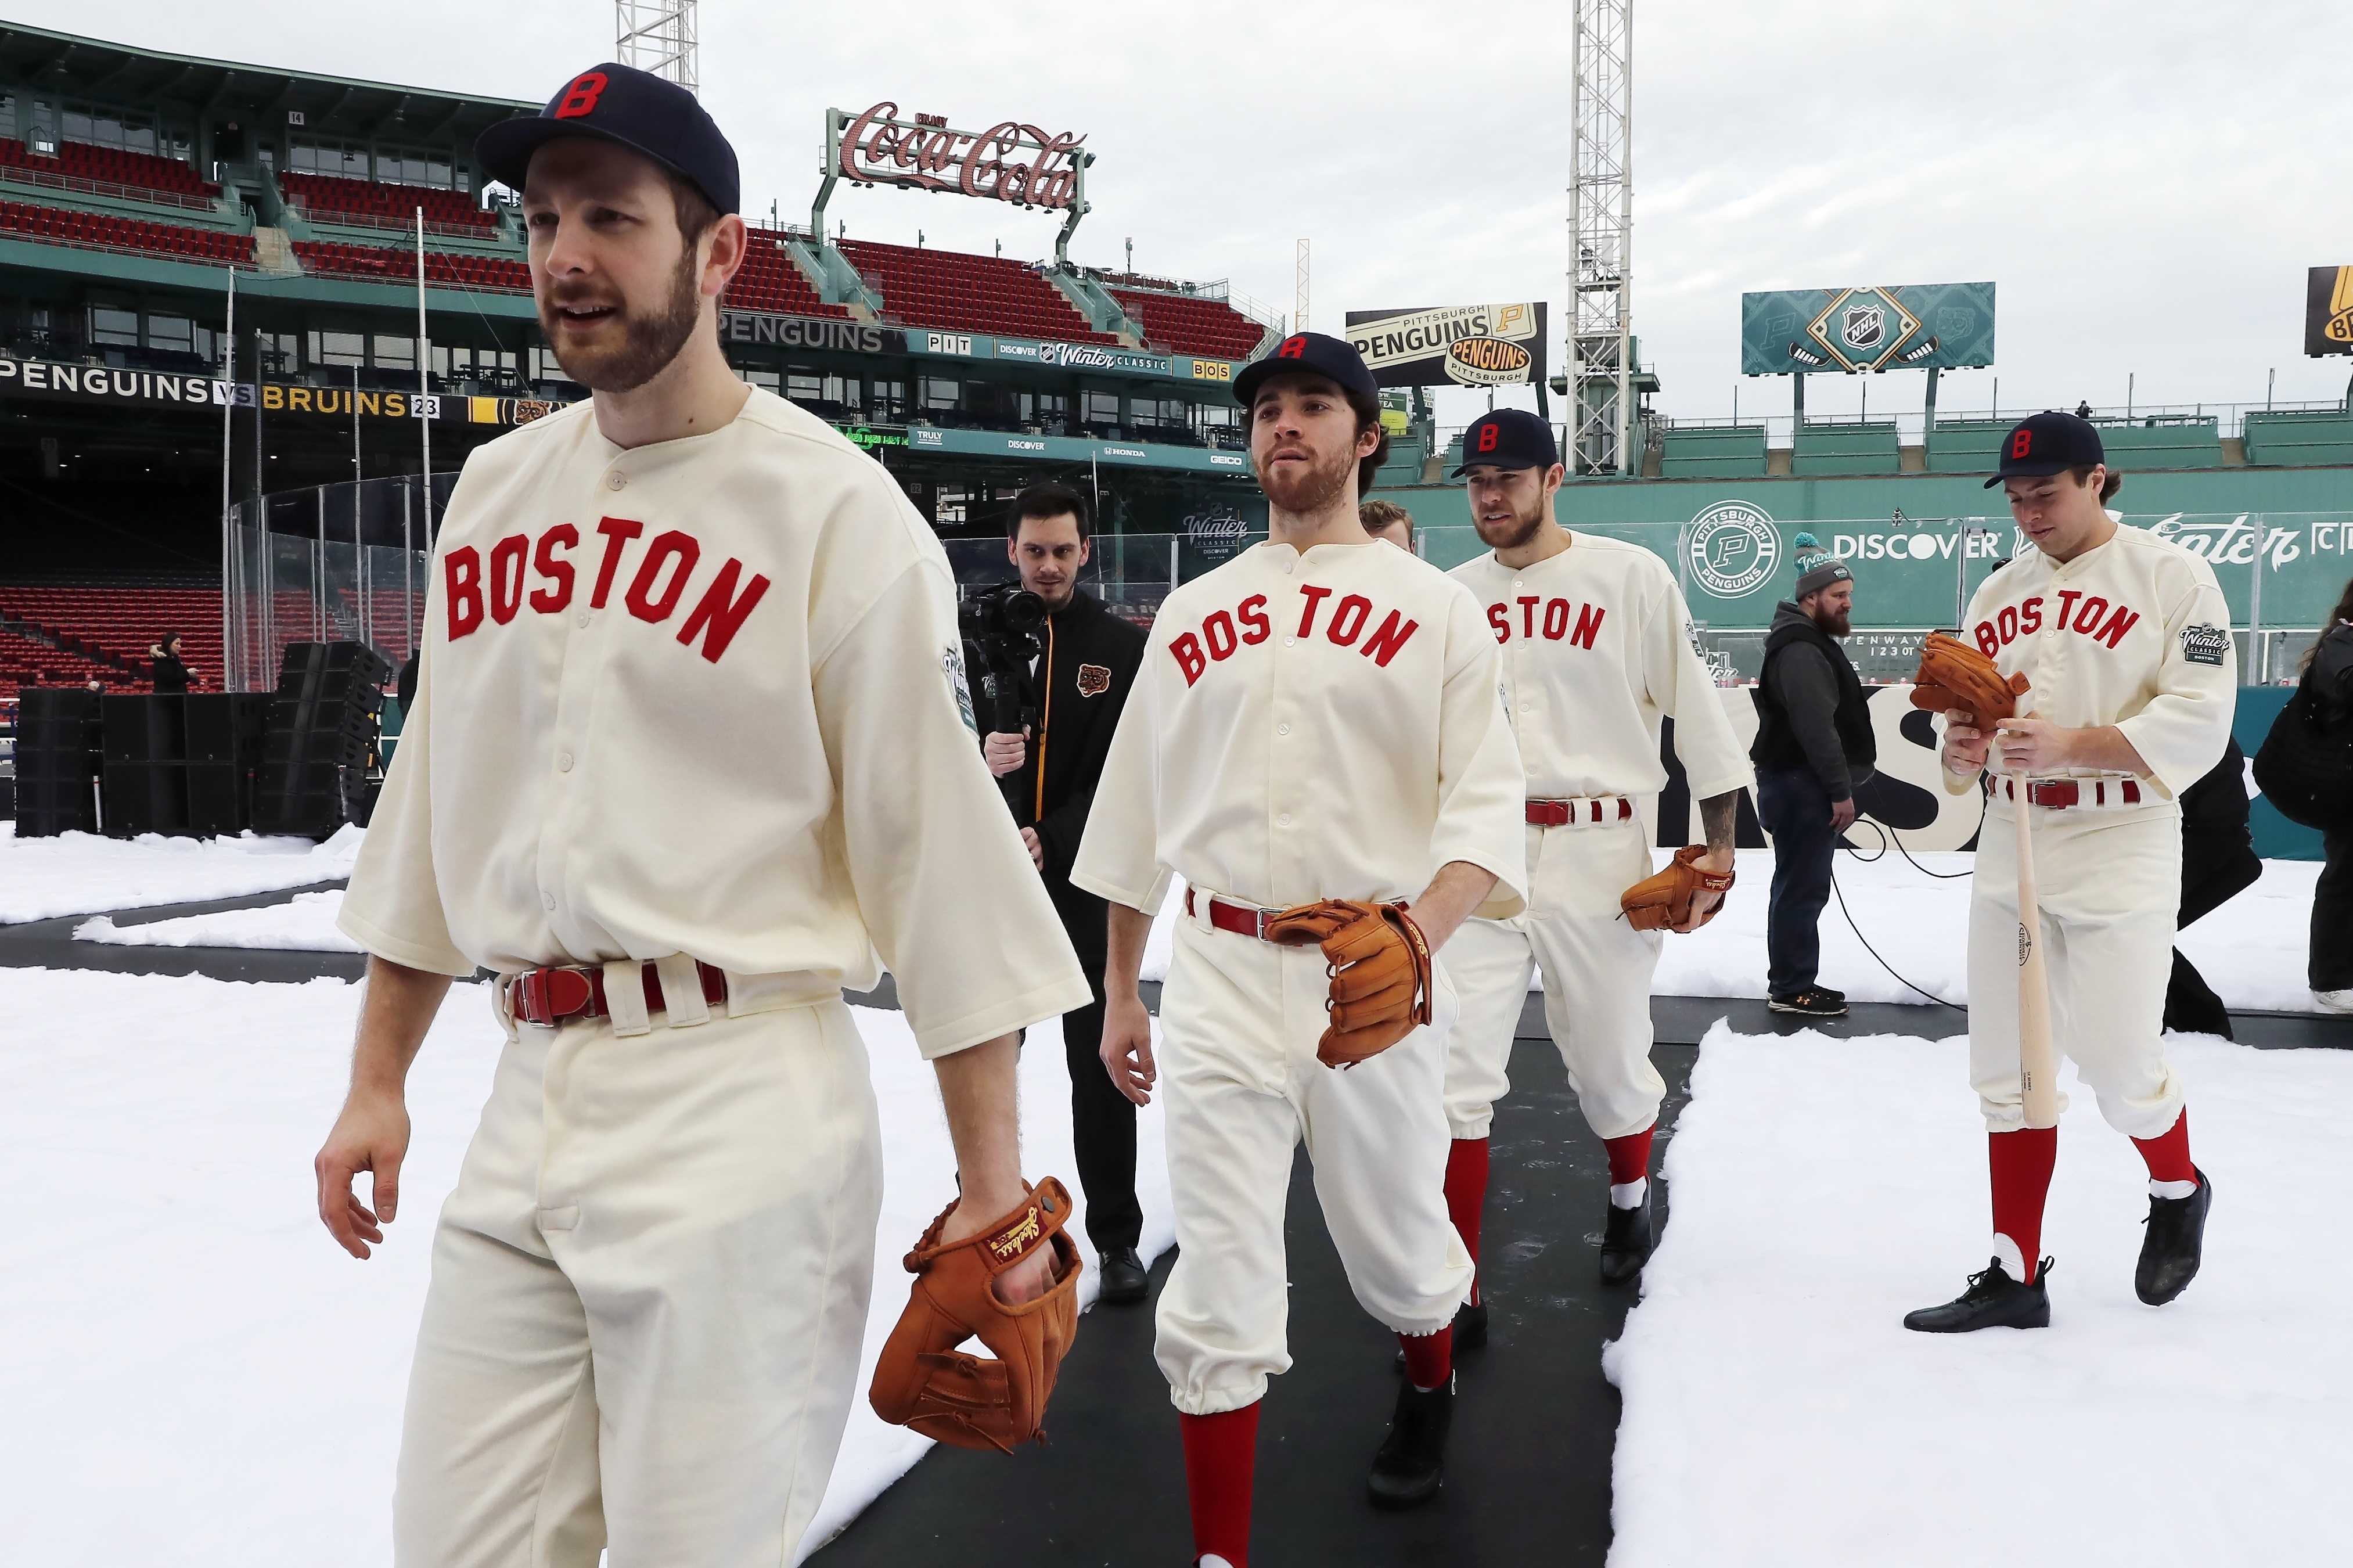 red sox white uniforms